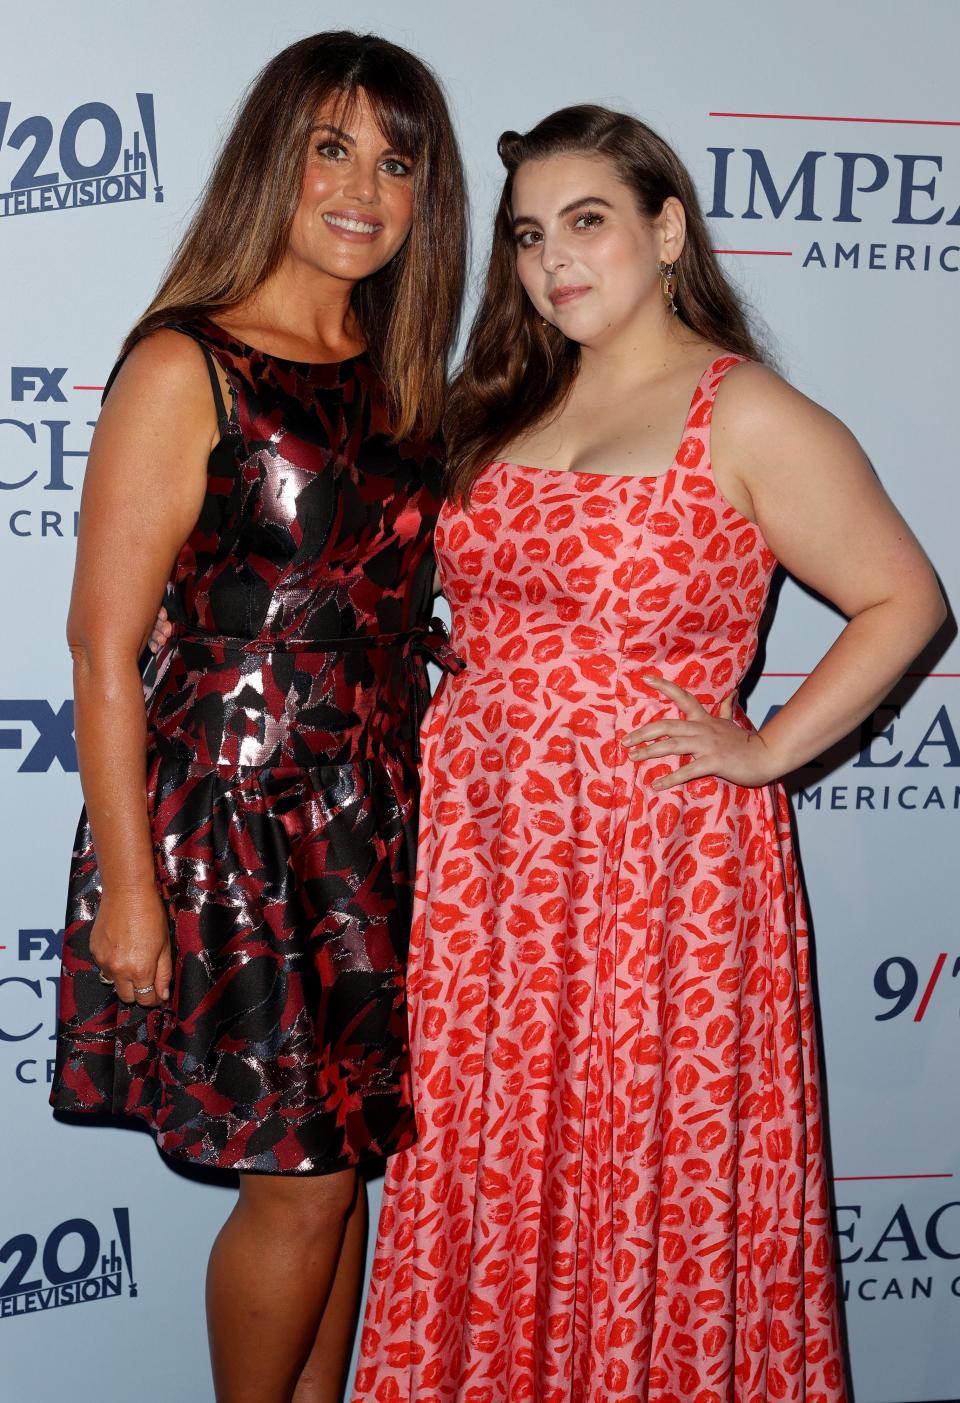 The real-life Monica Lewinsky, left, and actress Beanie Feldstein attend the "Impeachment" premiere in West Hollywood earlier this month.